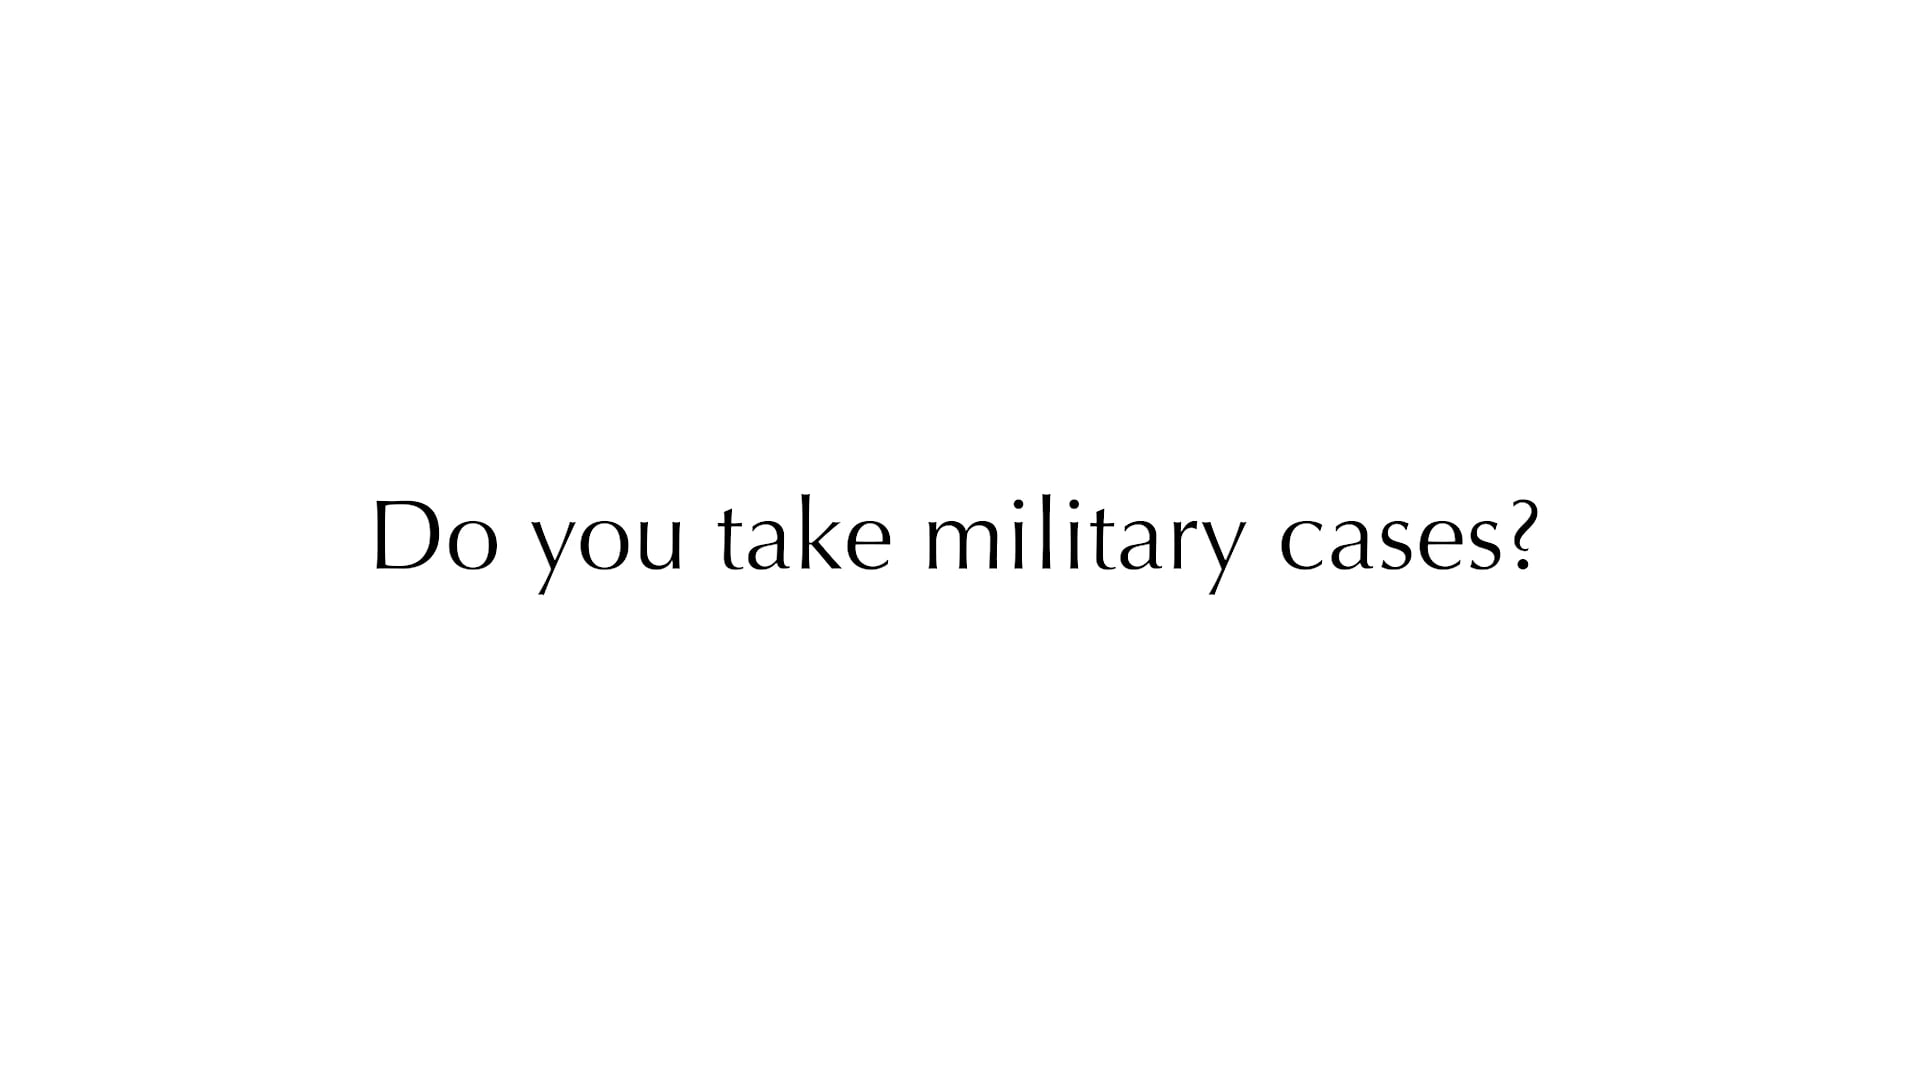 Do you take military cases